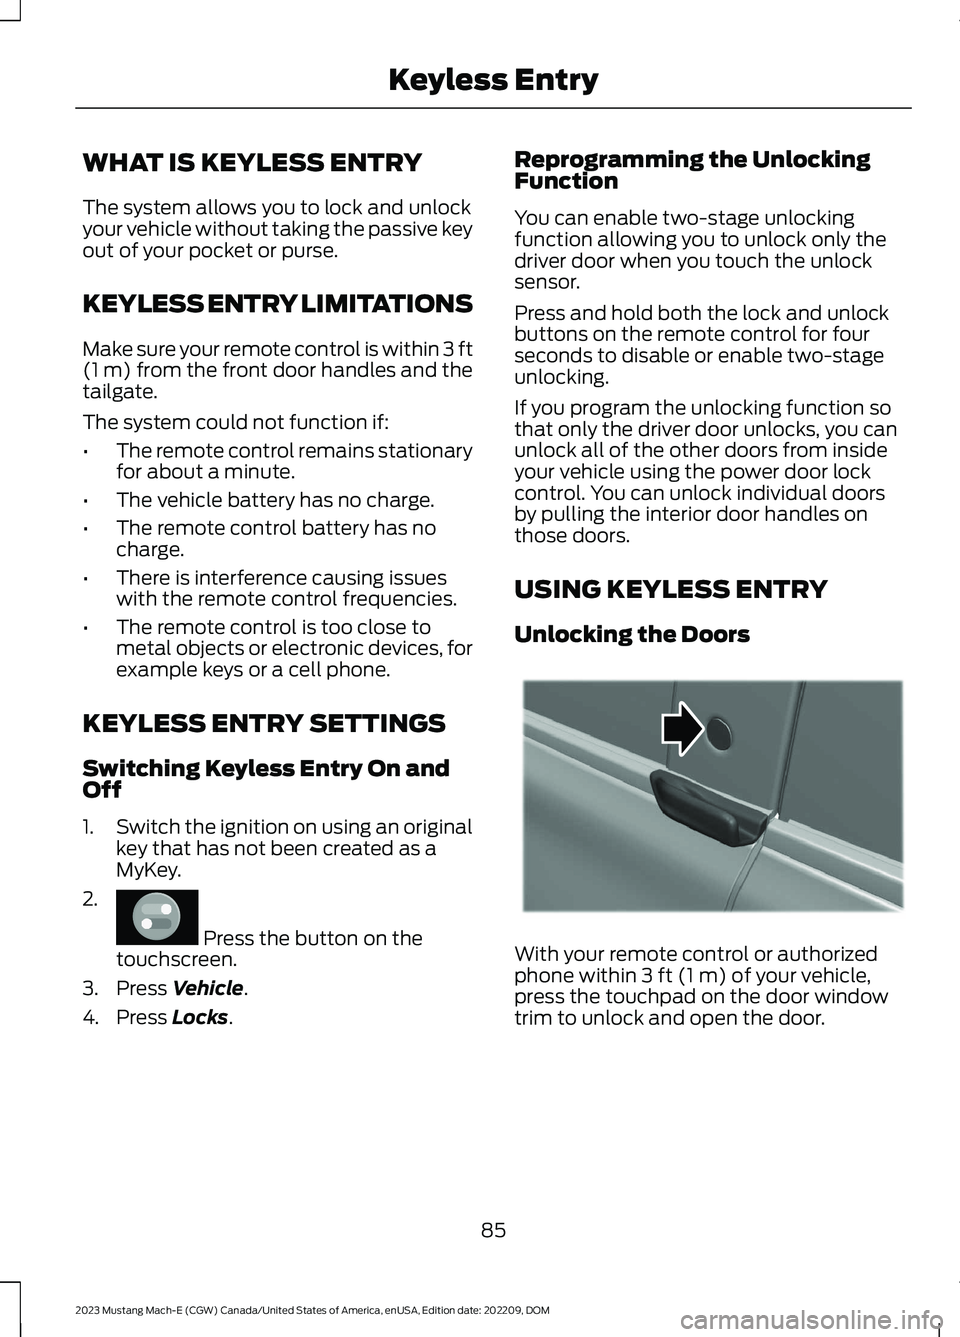 FORD MUSTANG MACH E 2023  Owners Manual WHAT IS KEYLESS ENTRY
The system allows you to lock and unlockyour vehicle without taking the passive keyout of your pocket or purse.
KEYLESS ENTRY LIMITATIONS
Make sure your remote control is within 